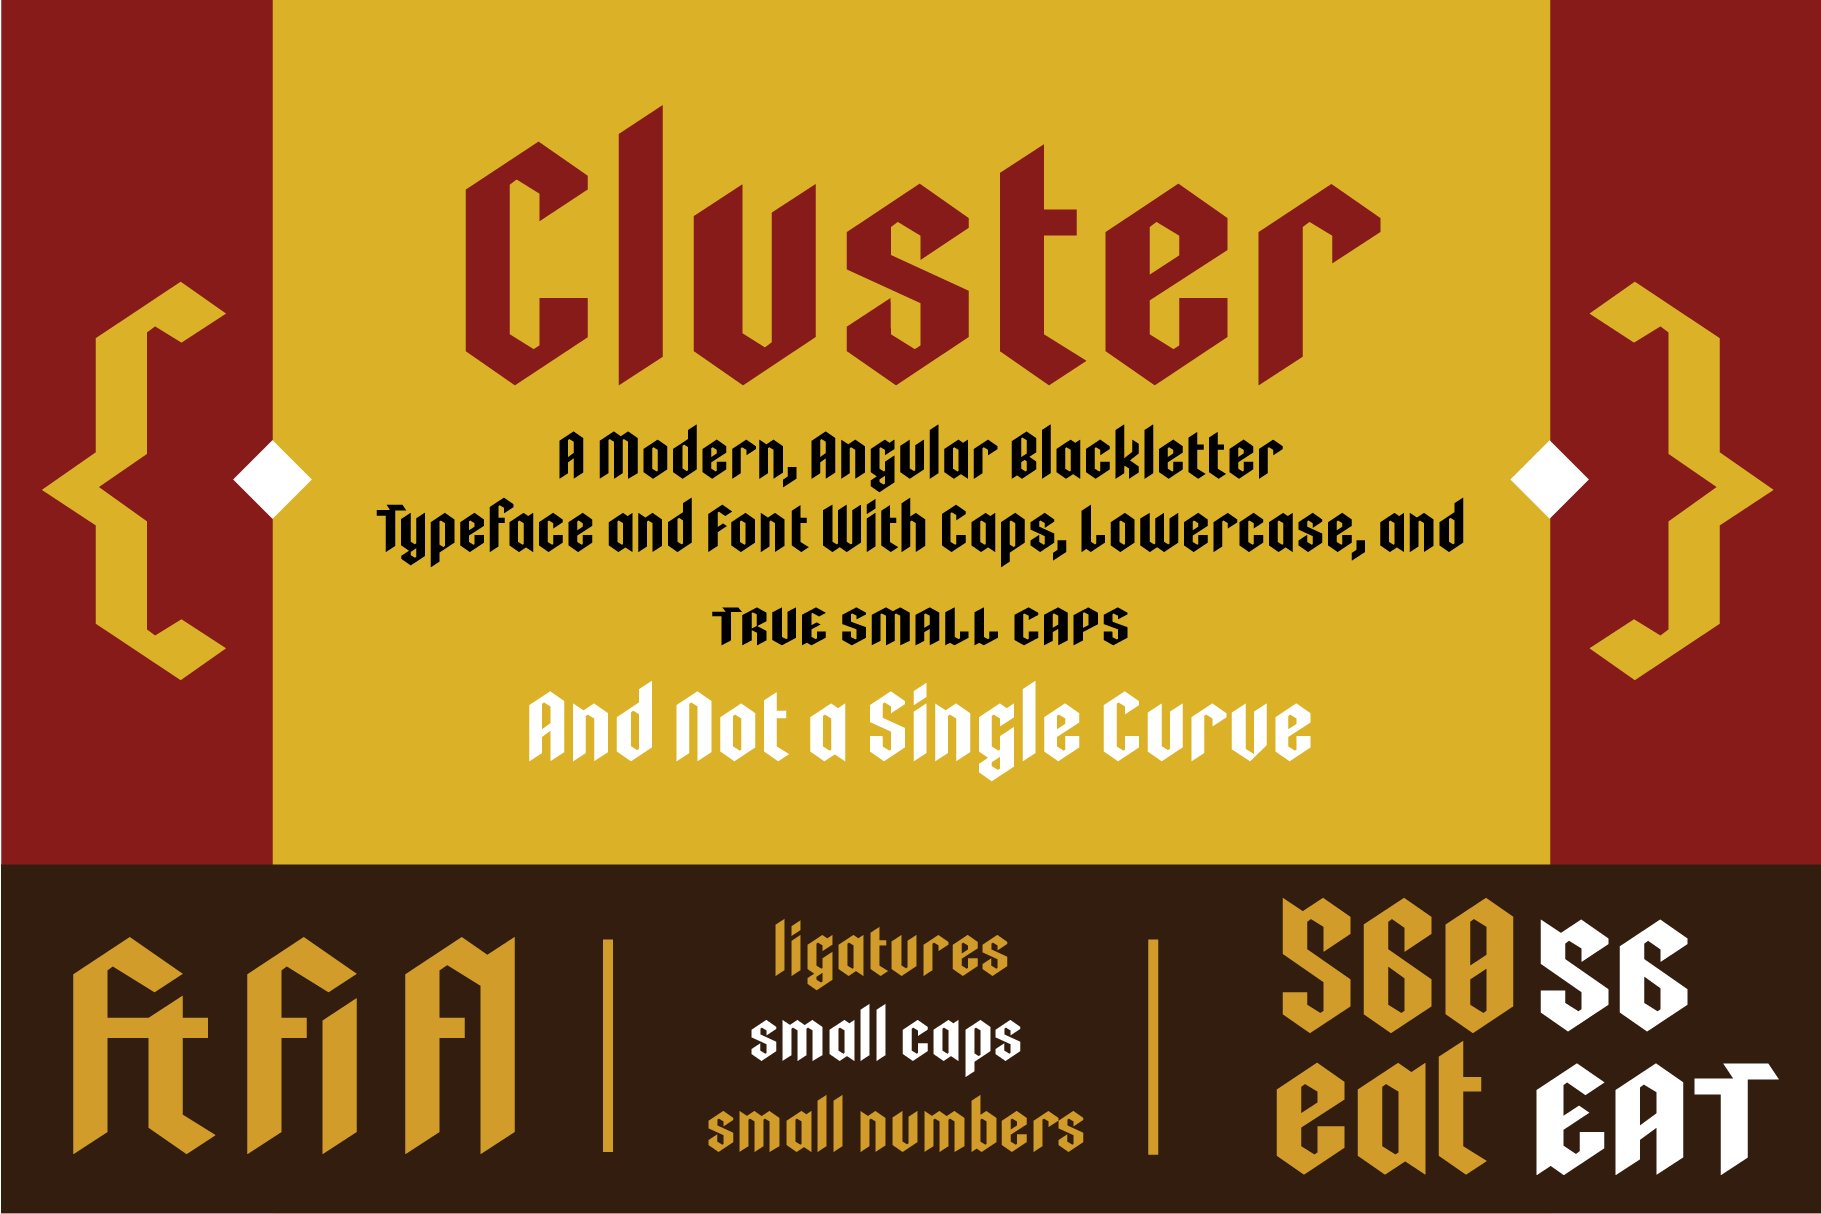 Cluster cover image.